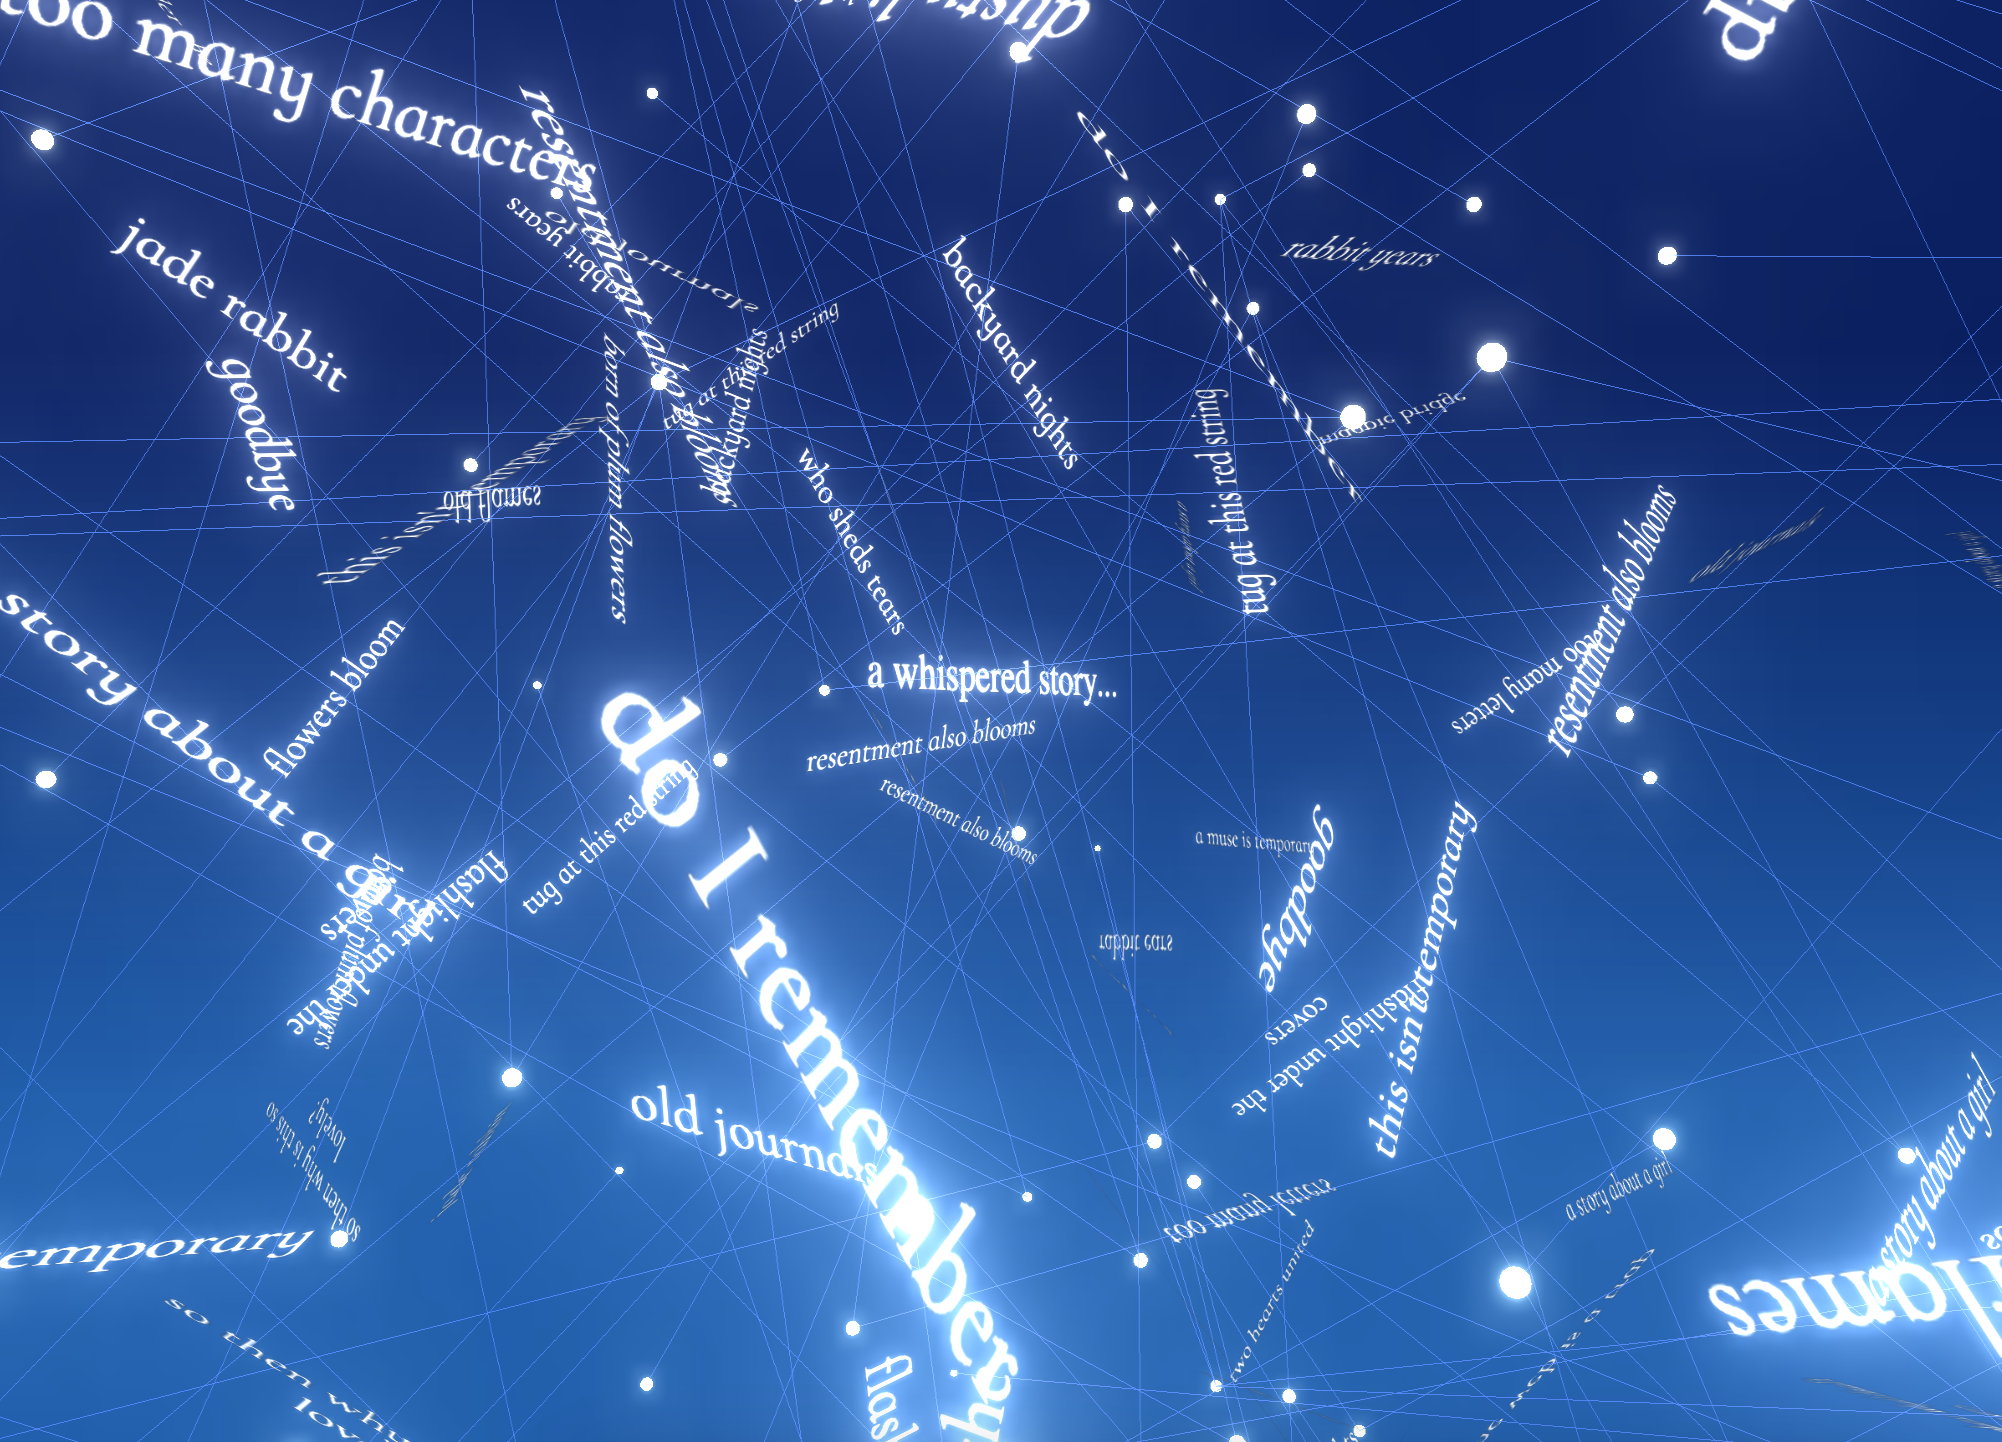 a blue gradient background with glowing white nodes and links between them like constellations. glowing words sit on the links to create a poem of different orientations.